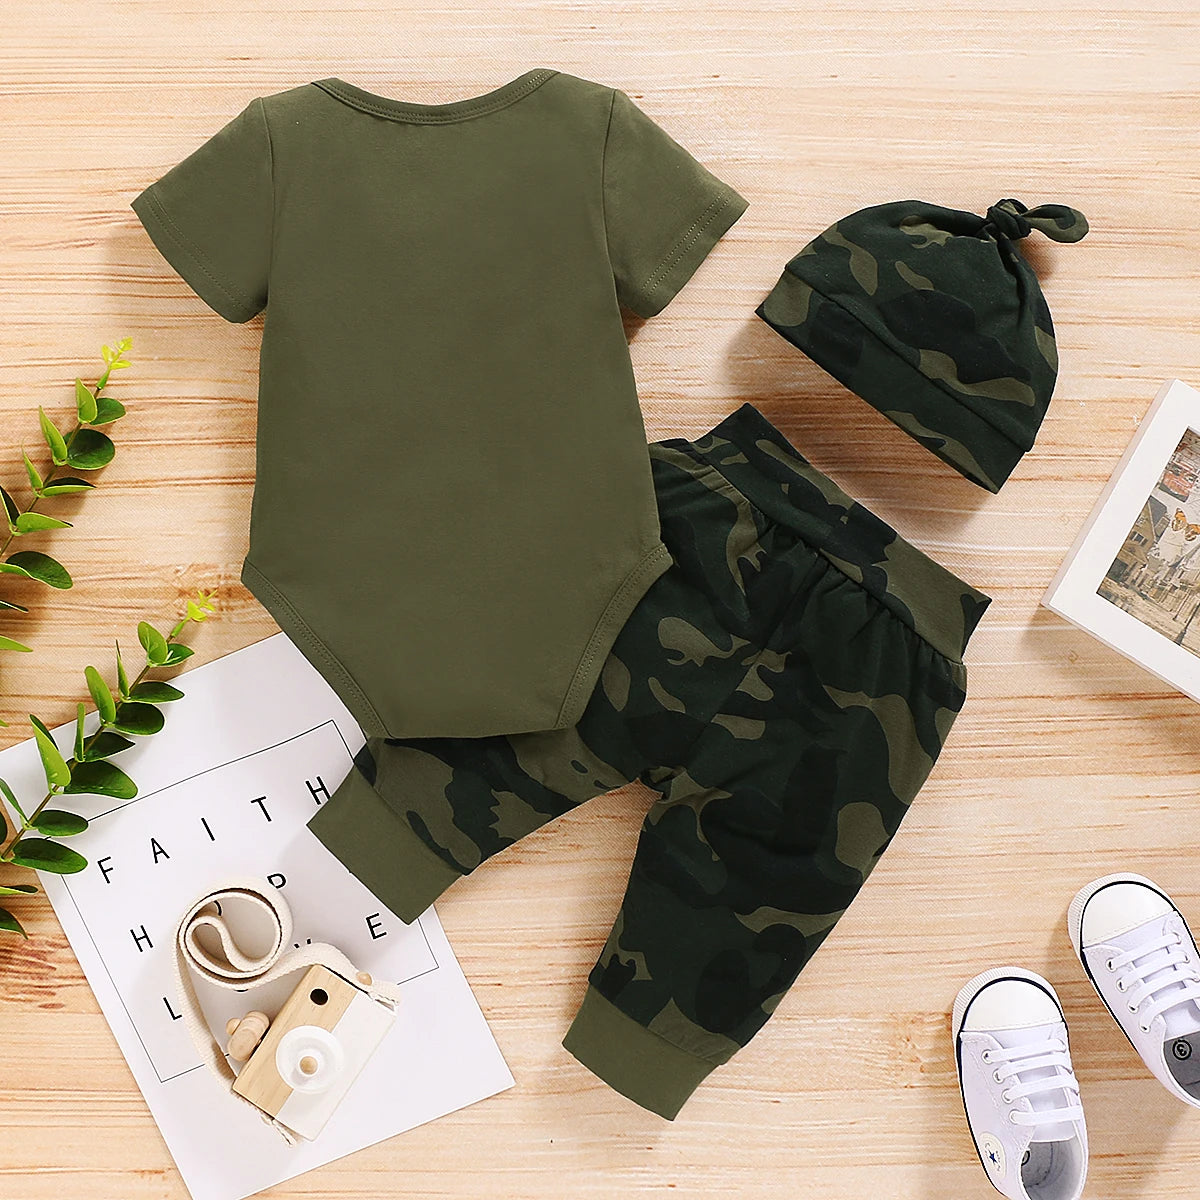 3pcs. Camouflage 0-18 Months Newborn Baby Boy Outfit